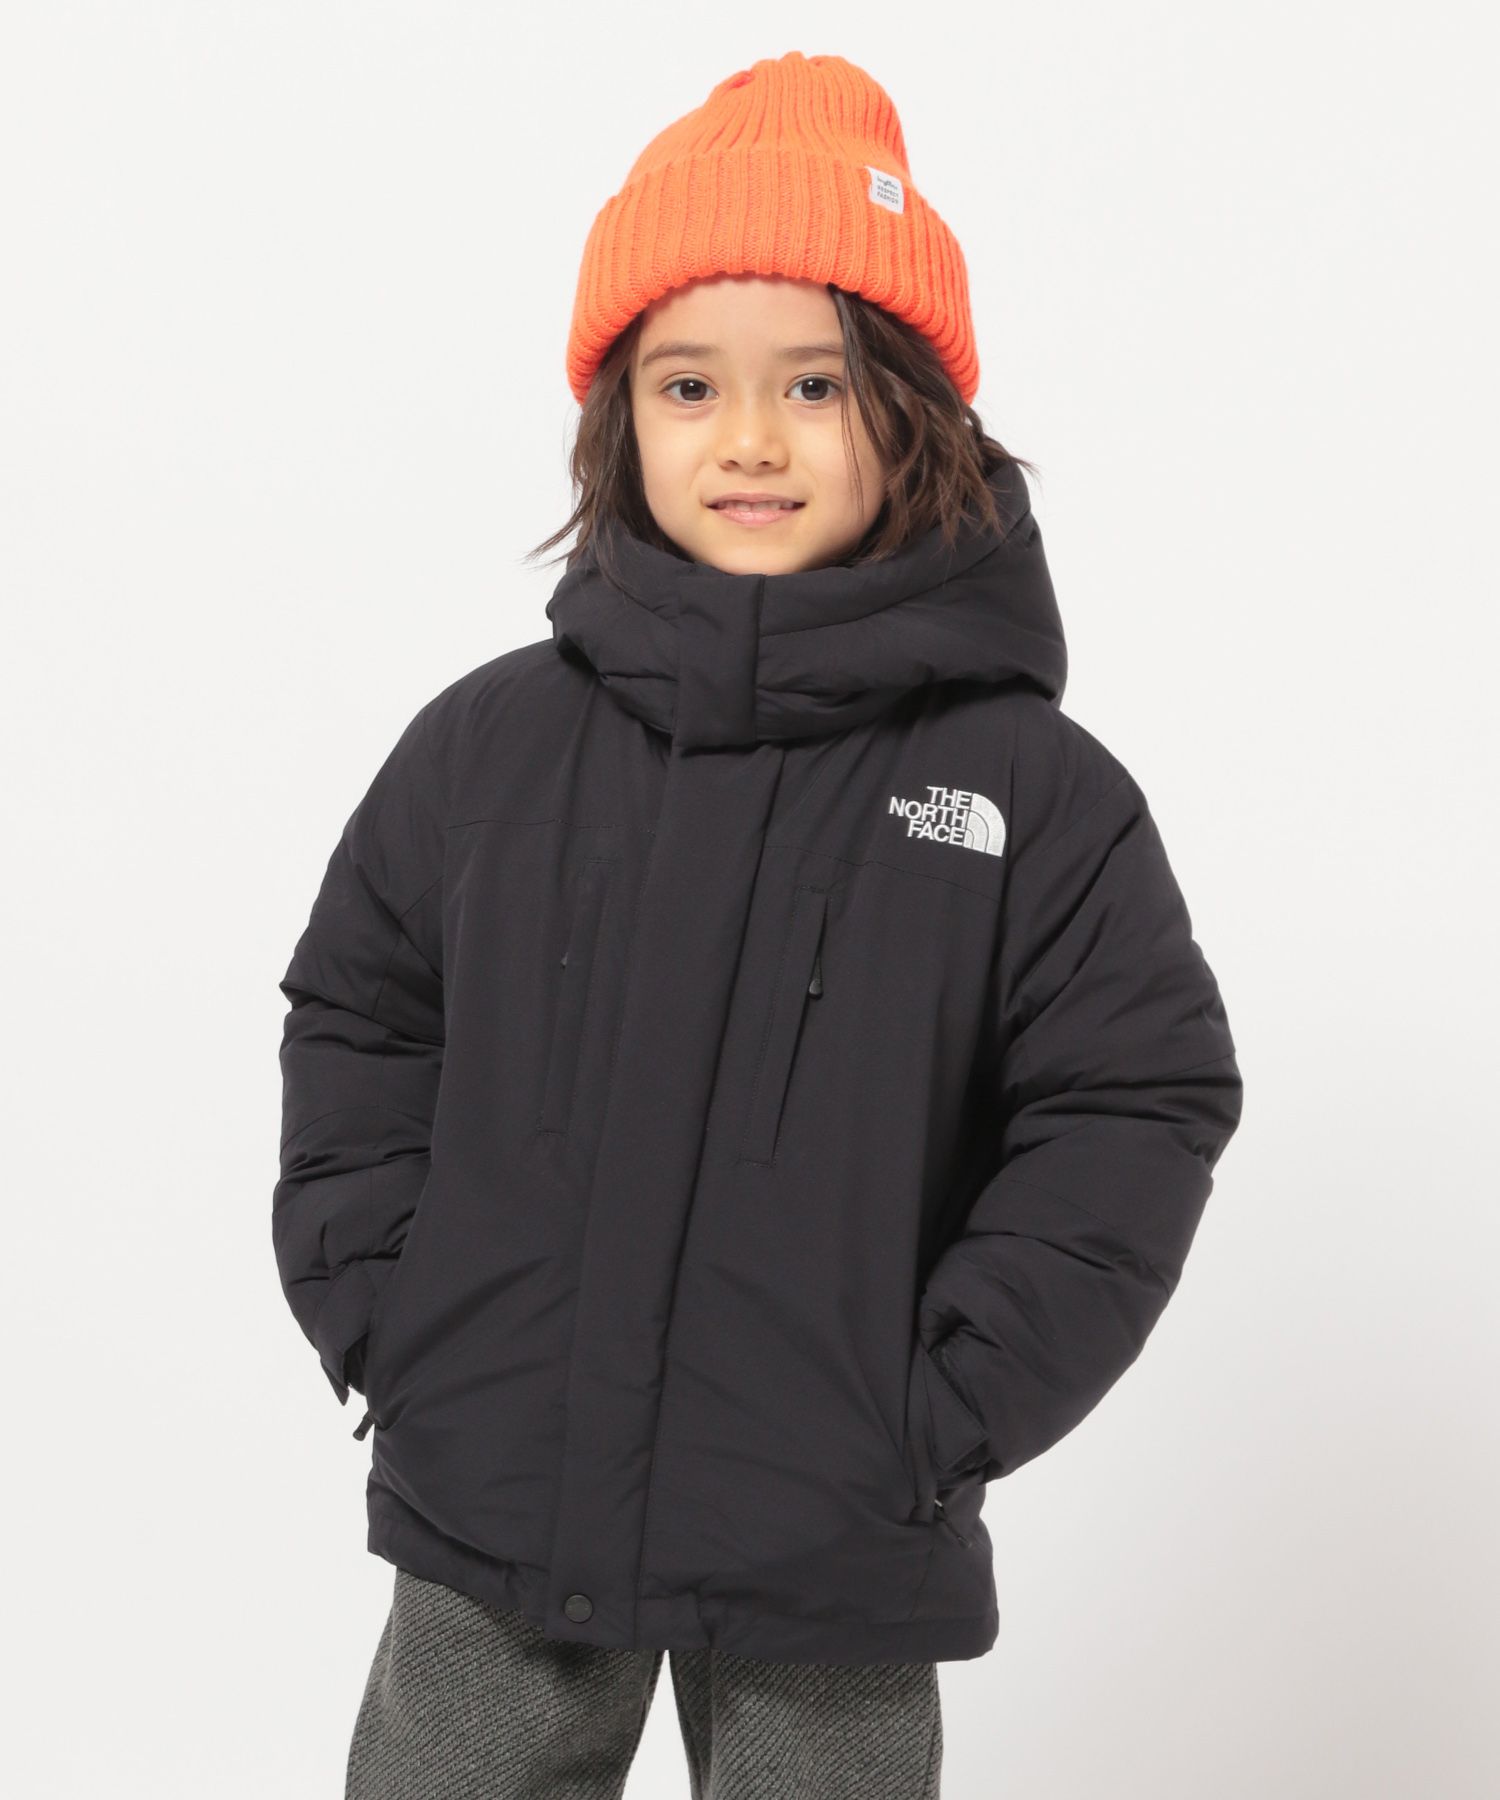 THE NORTH FACE バルトロライトジャケット キッズ140㎝ 黒 ...